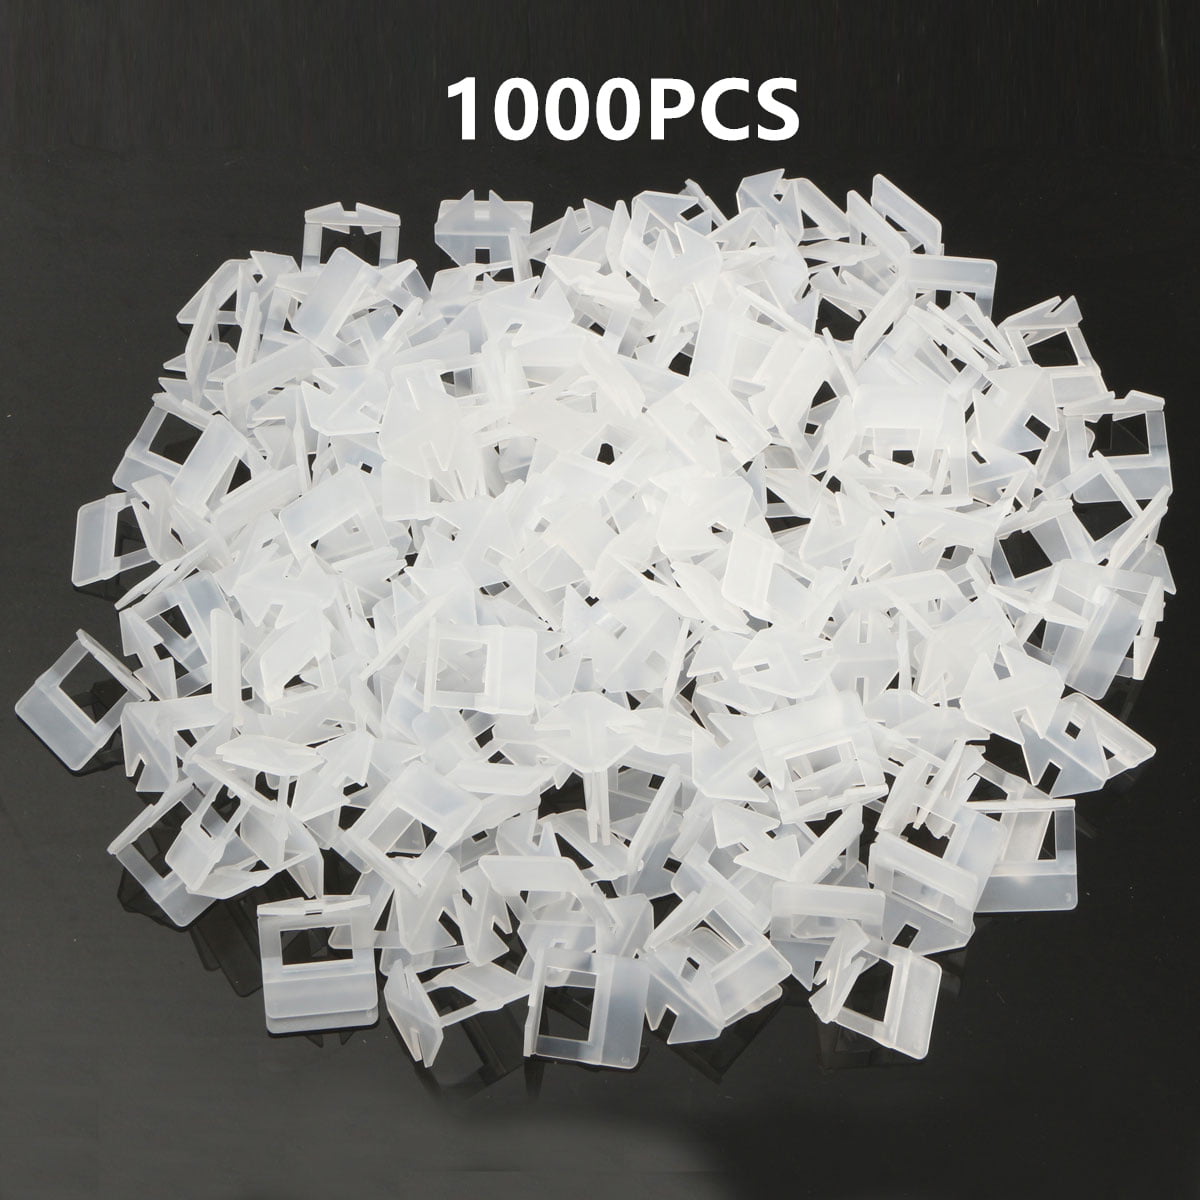 2MM 800PCS Tile Levelling System Perfect Leveling System Wedges System Spacers